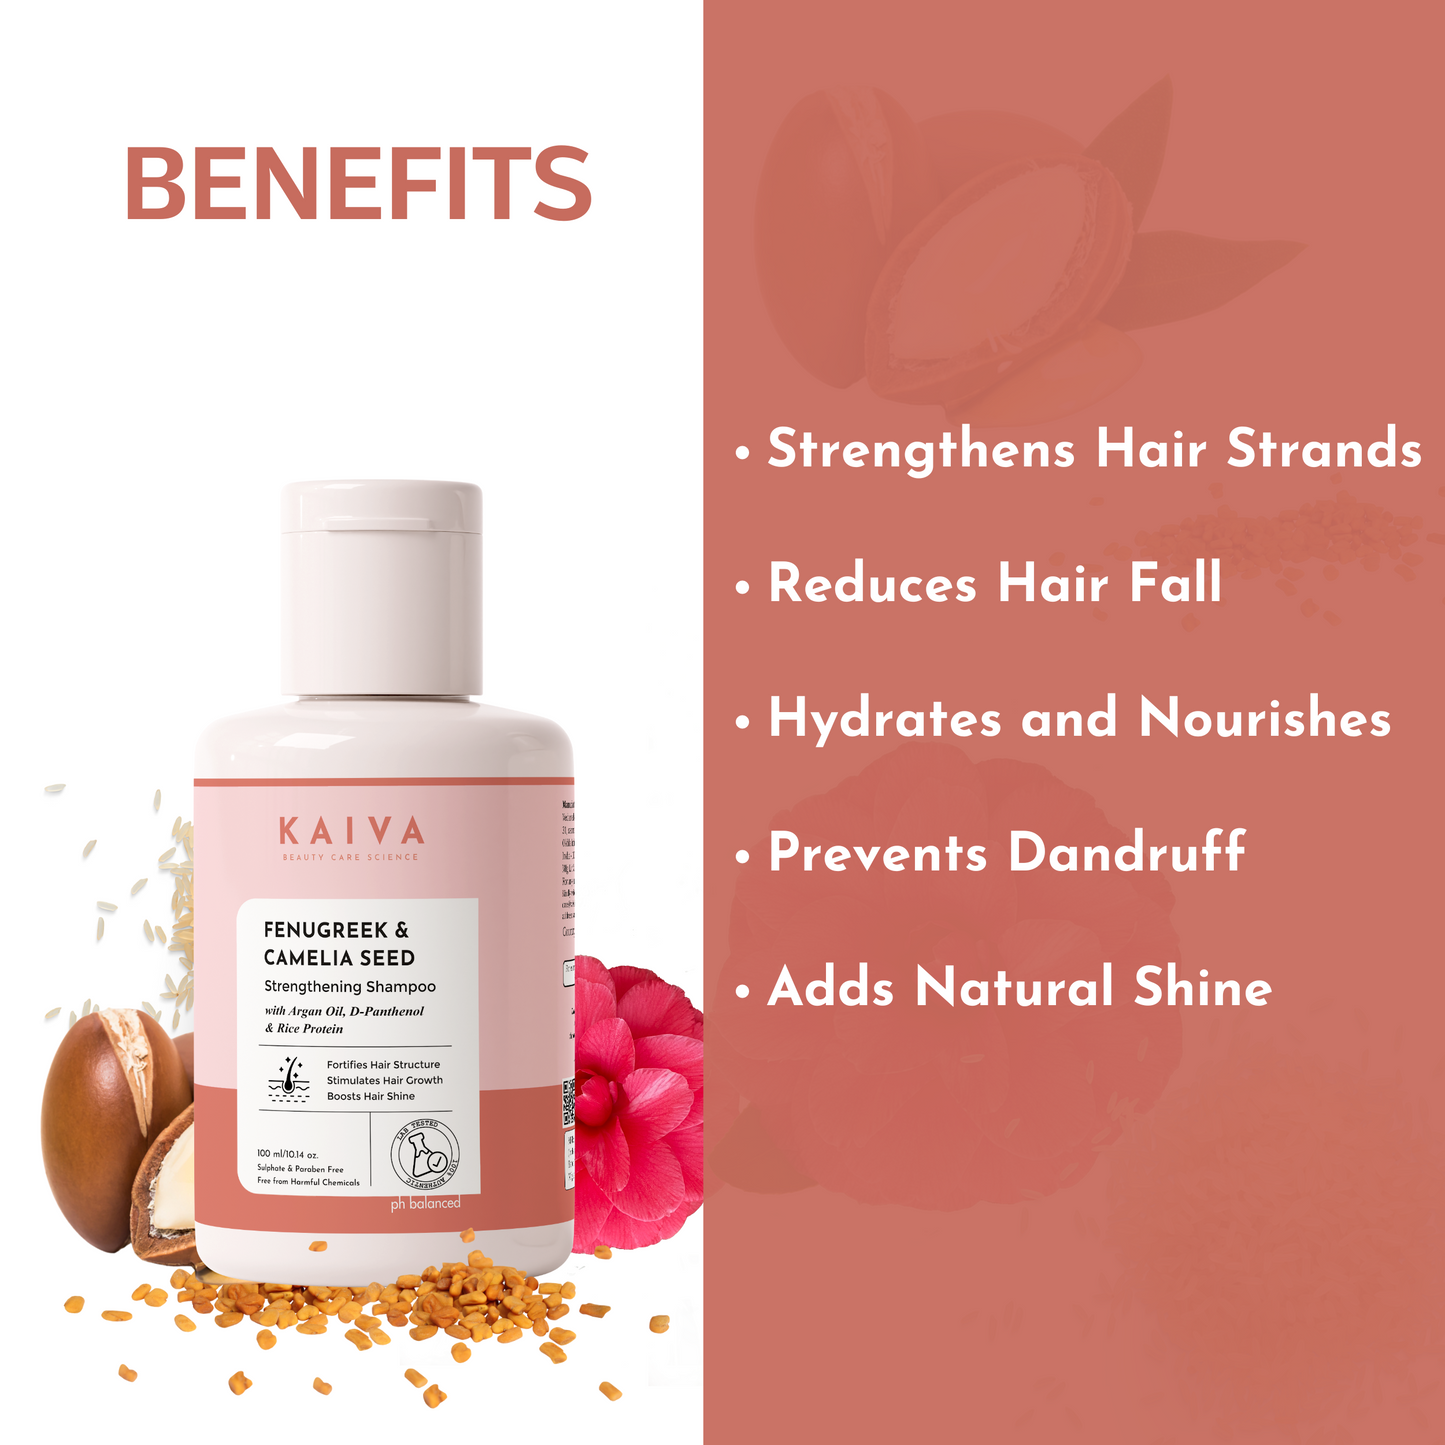 Fenugreek Strengthening Shampoo with Camellia Seed Extract